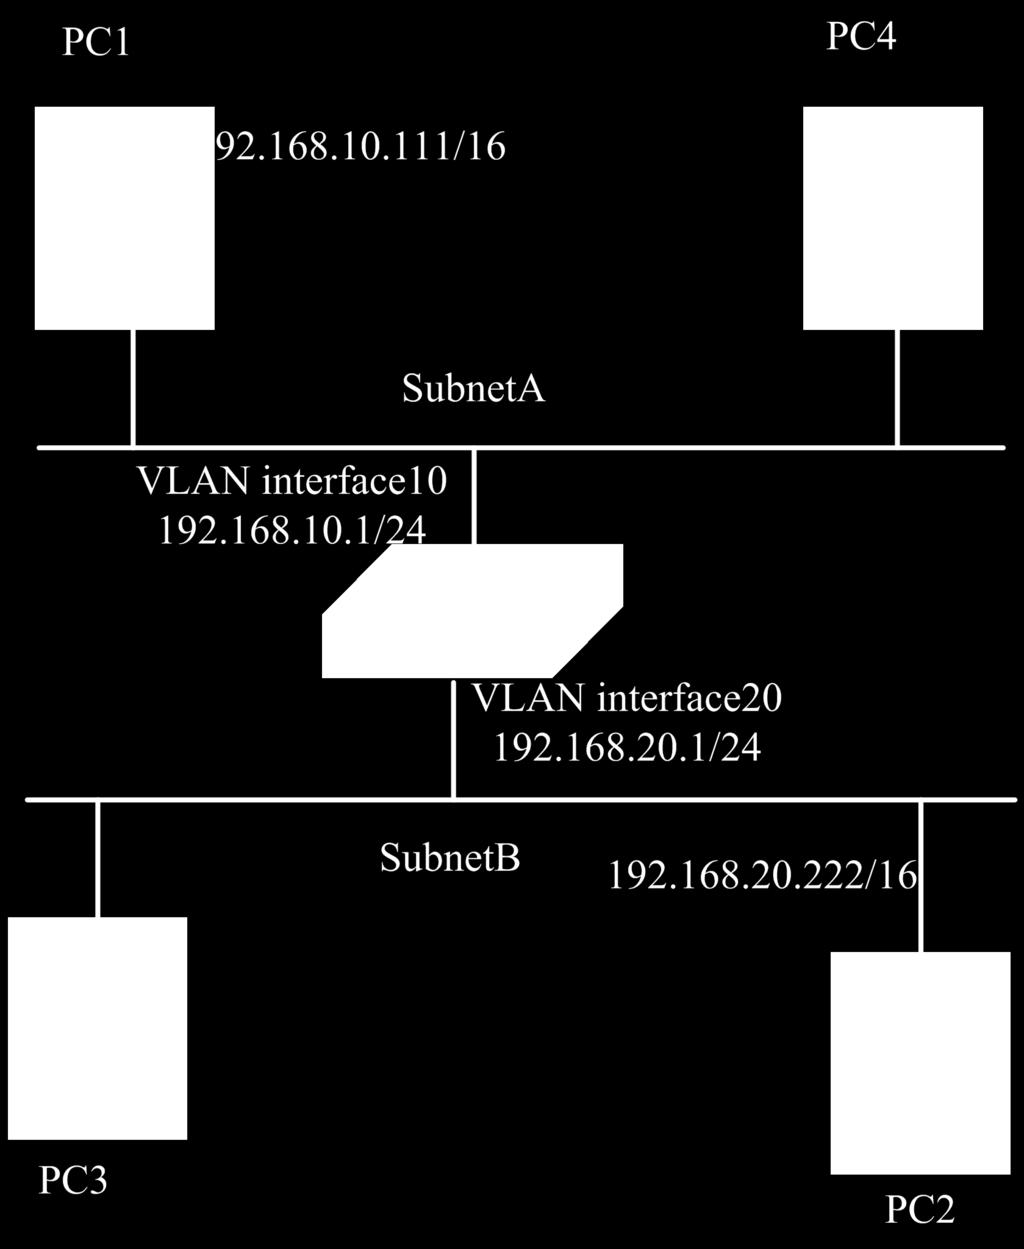 2.2 Configuring ARP Proxy 2.2.1 Topology Figure 2-1 ARP Proxy topology 2.2.2 Configuration As seen in the above topology, PC1 is belonged to VLAN10 and PC2 is belonged to VLAN20.